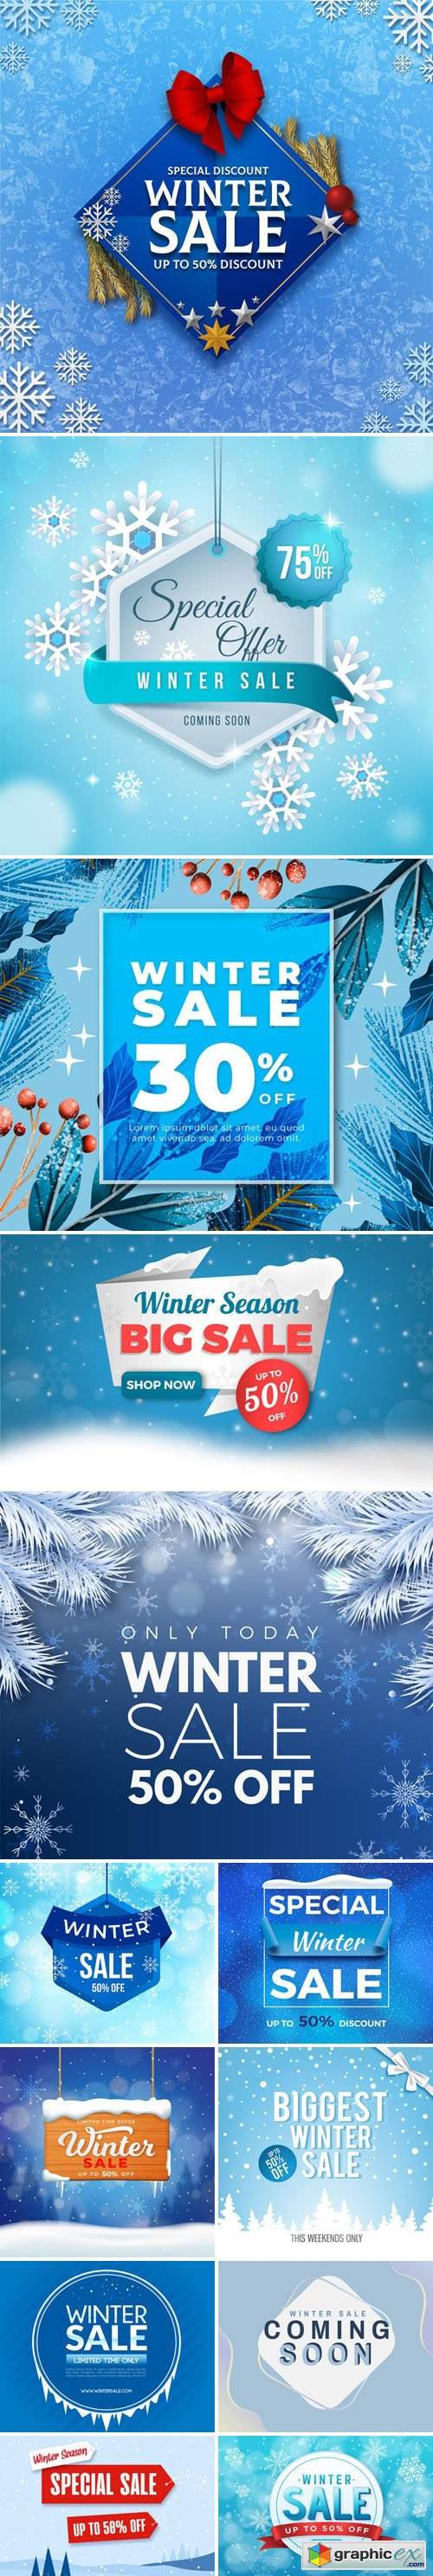  13 Winter Sales Templates Collection in Vector 